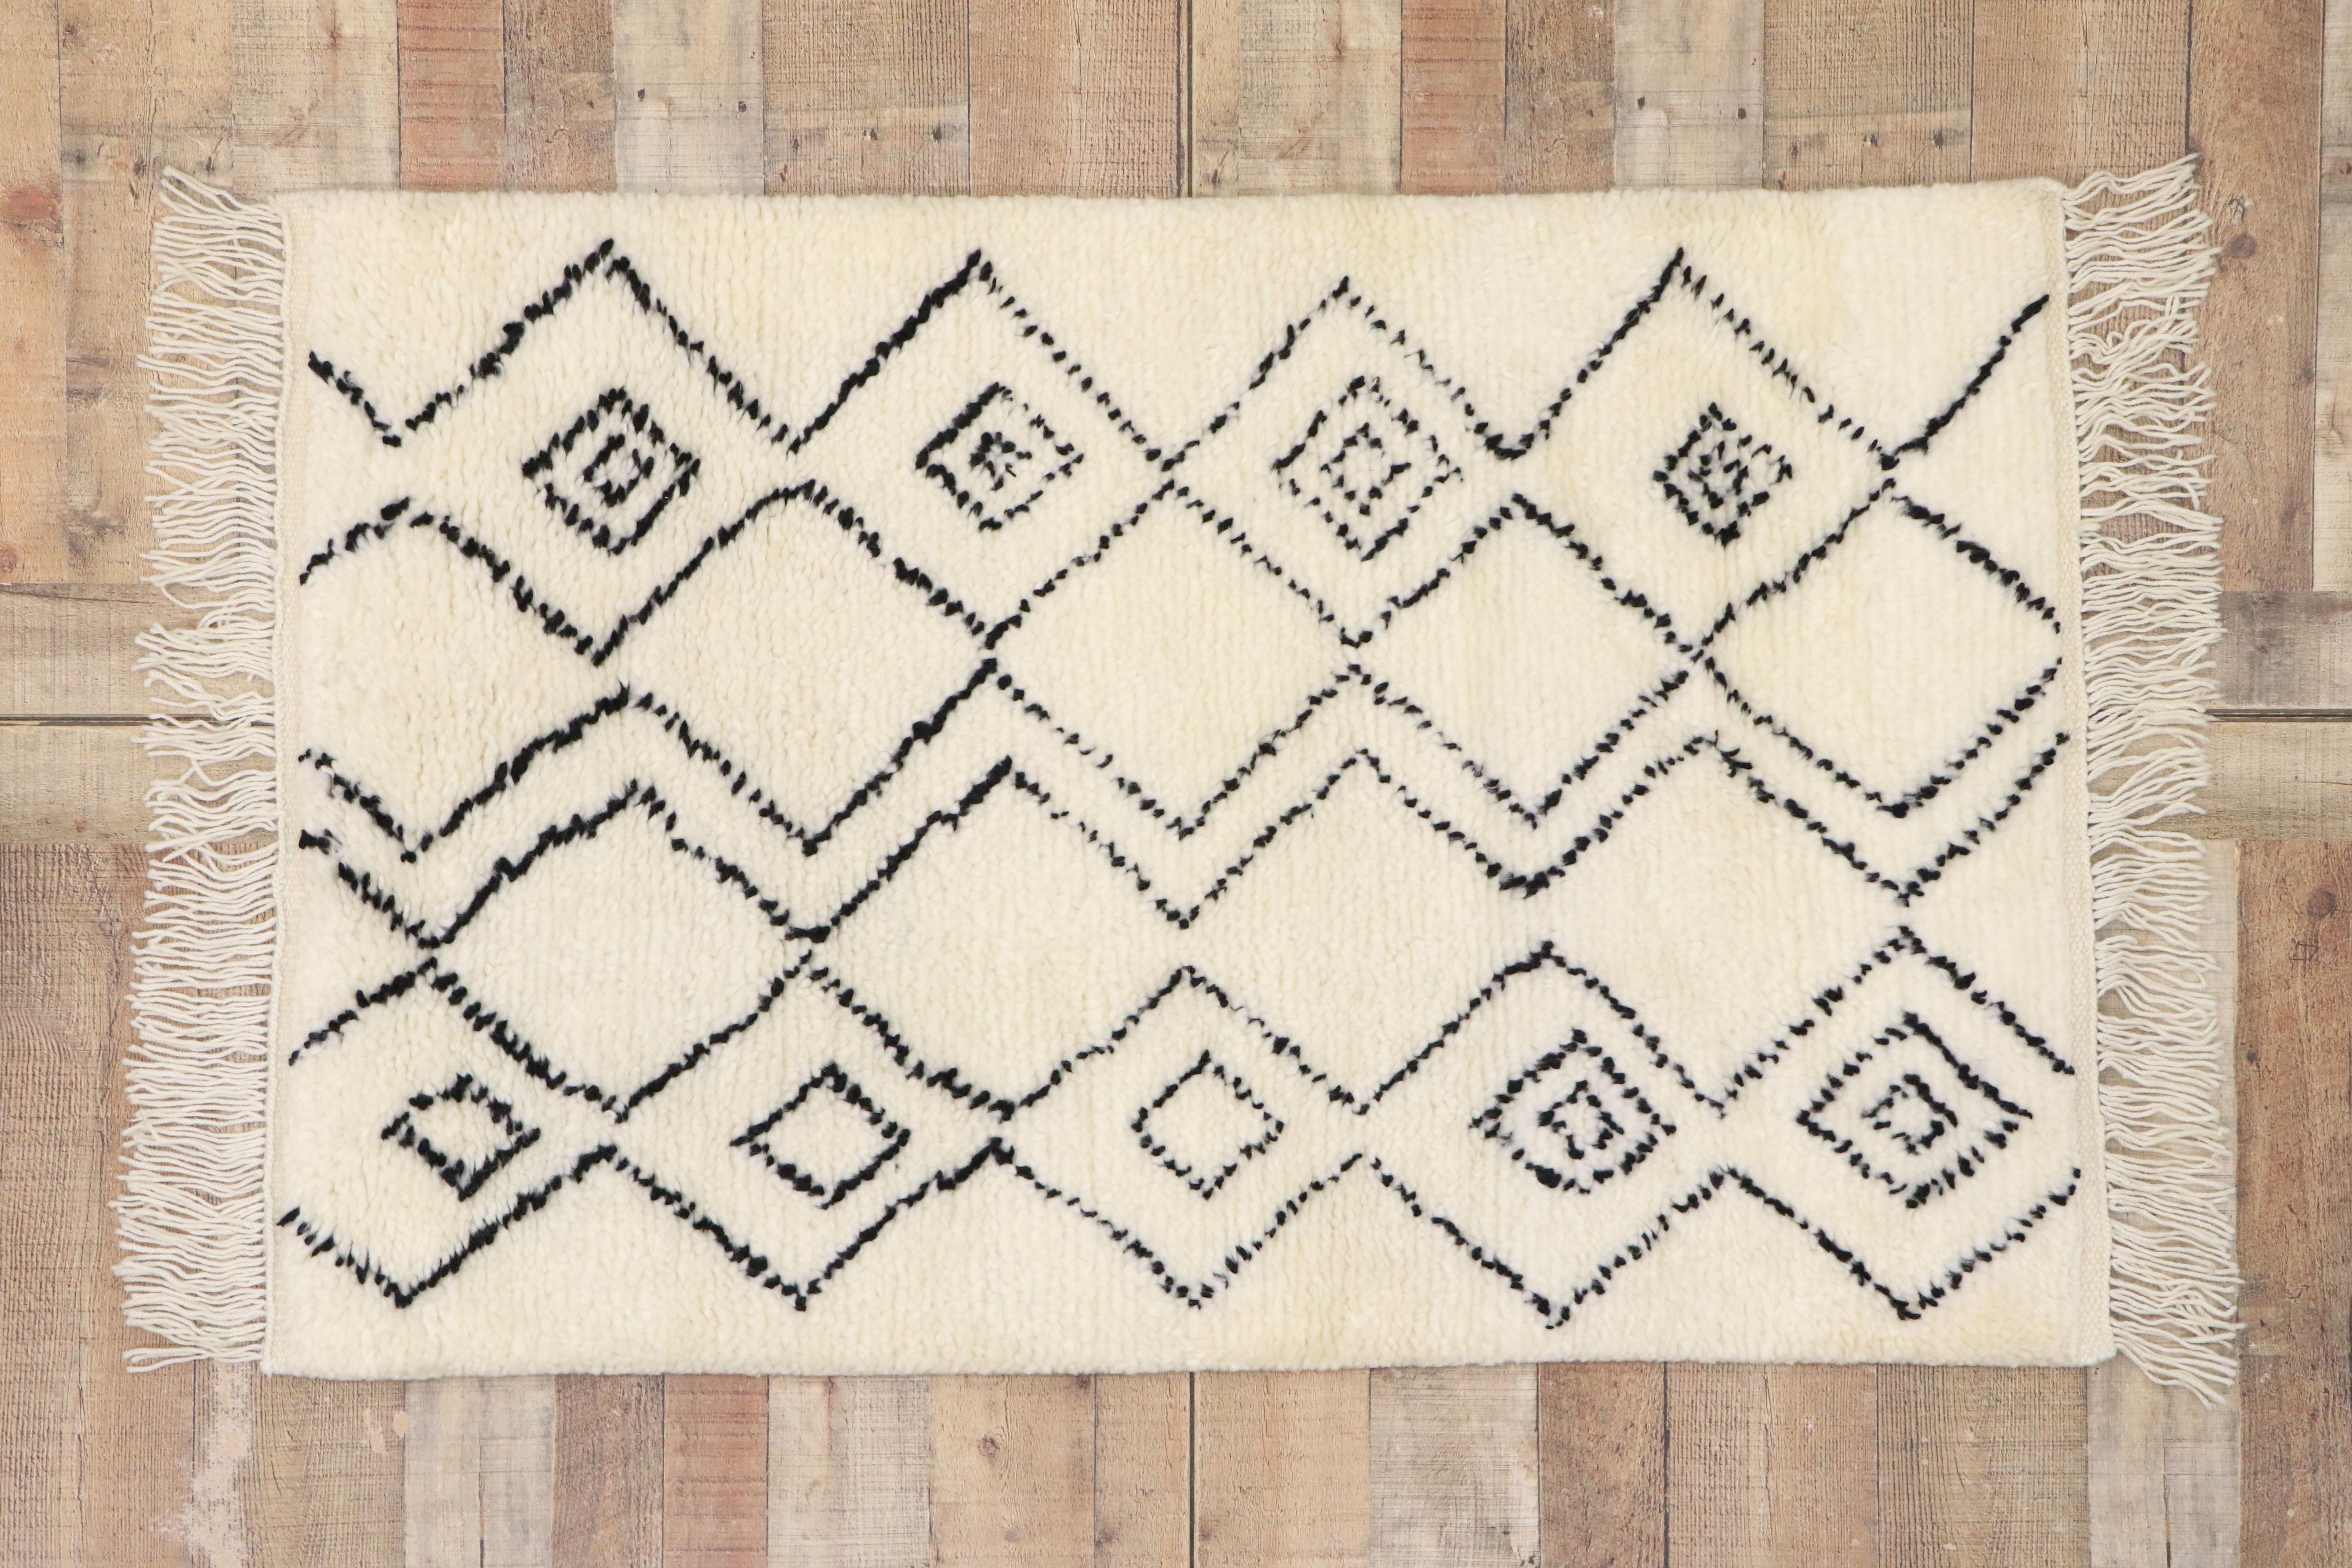 30609 new contemporary Moroccan style rug with Minimalist tribal vibes. This hand knotted wool contemporary Moroccan area rug features offset vertical columns composed of black zigzag chevron lines unite to form stacked lozenges forming a diamond